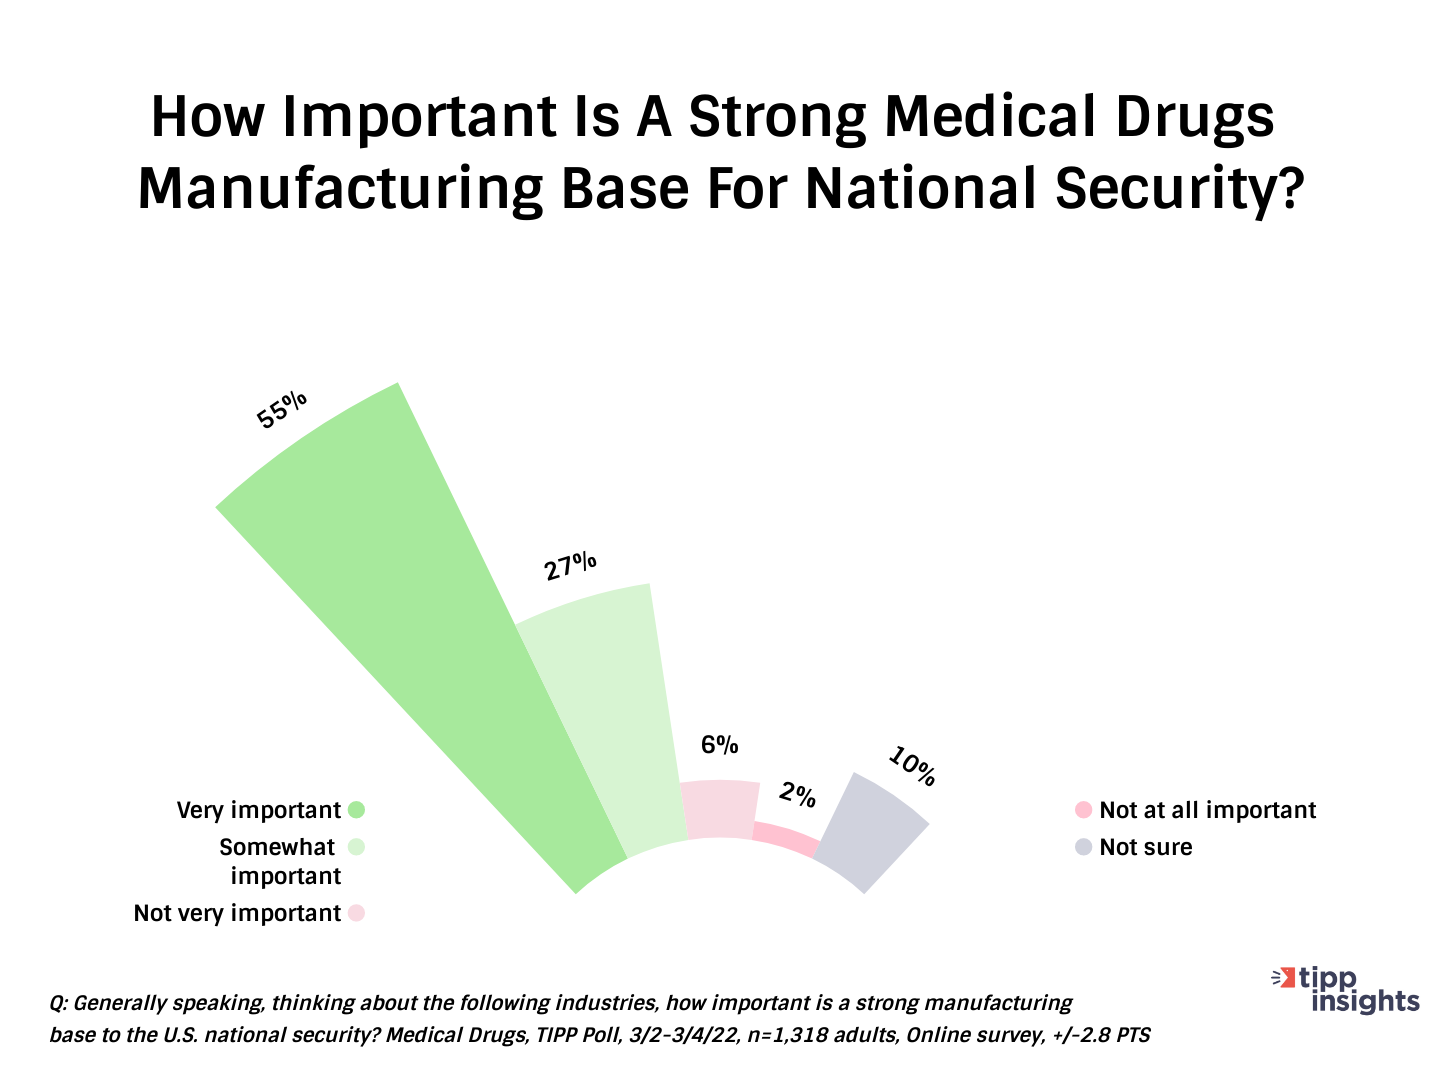 TIPP Poll Results: How important is a strong medical drugs manufacturing base for Amerian National security